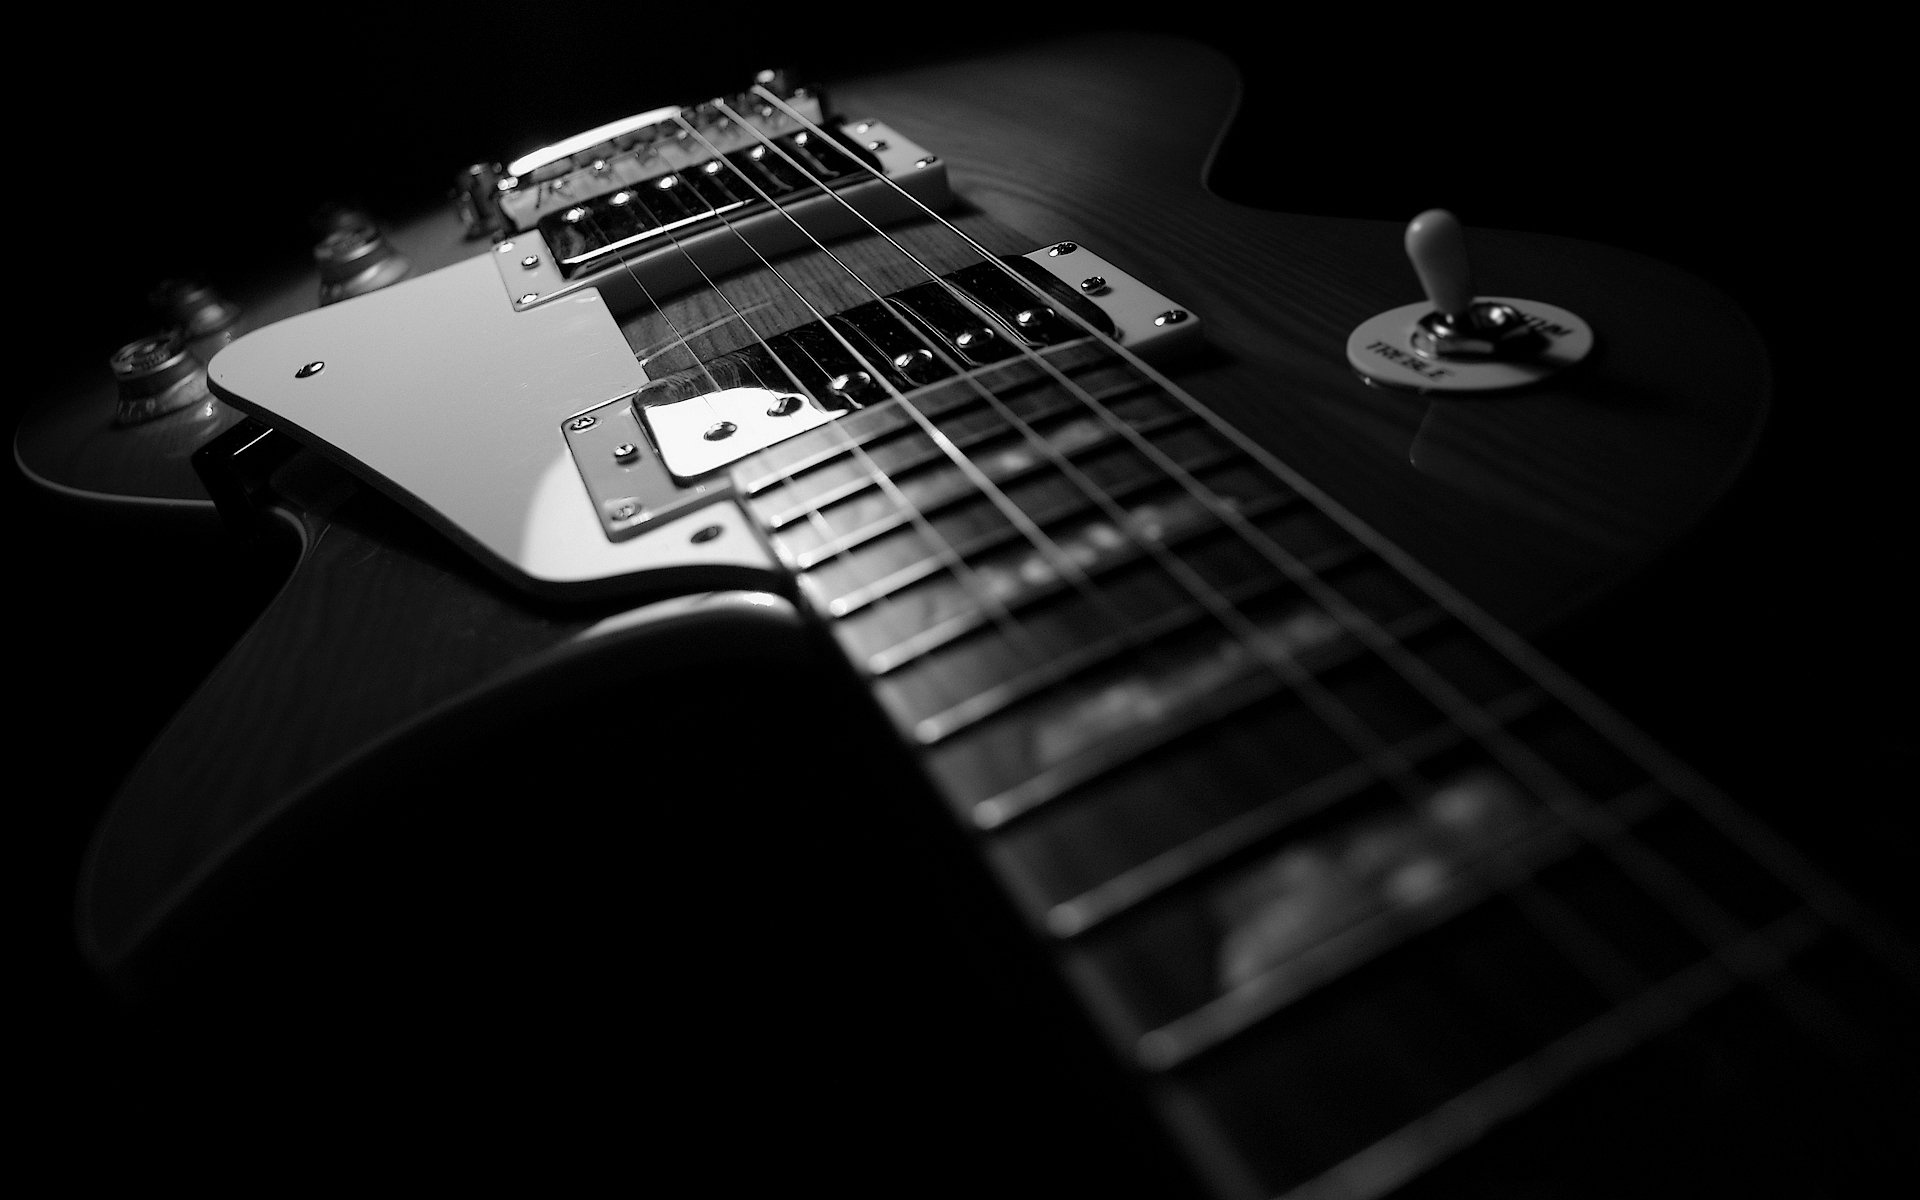 Guitar wallpapers, Musical backgrounds, High-definition images, Artistic showcases, 1920x1200 HD Desktop